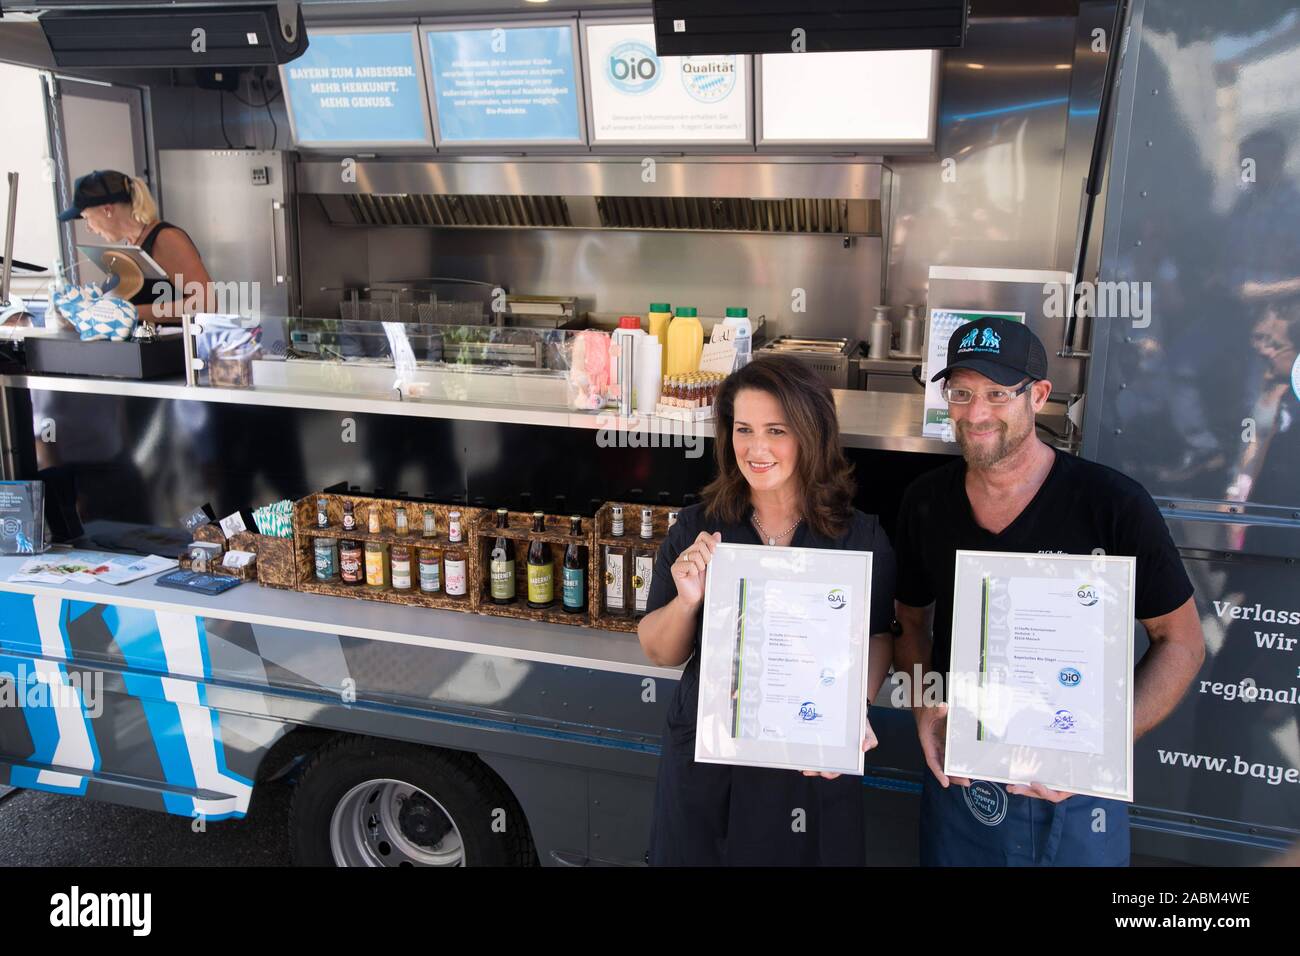 Michaela Kaniber (CSU), Minister of Nutrition, is sending a Bavarian Food Truck on its way from Galeriestraße at the corner of Ludwigstraße in Munich to inspire young people in Bavaria to buy regional food. In the picture she shows with Lars Mrosek from the Foodtruck the certificates 'Bayerisches Bio-Siegel' and 'Geprüfte Qualität - Bayern'. [automated translation] Stock Photo